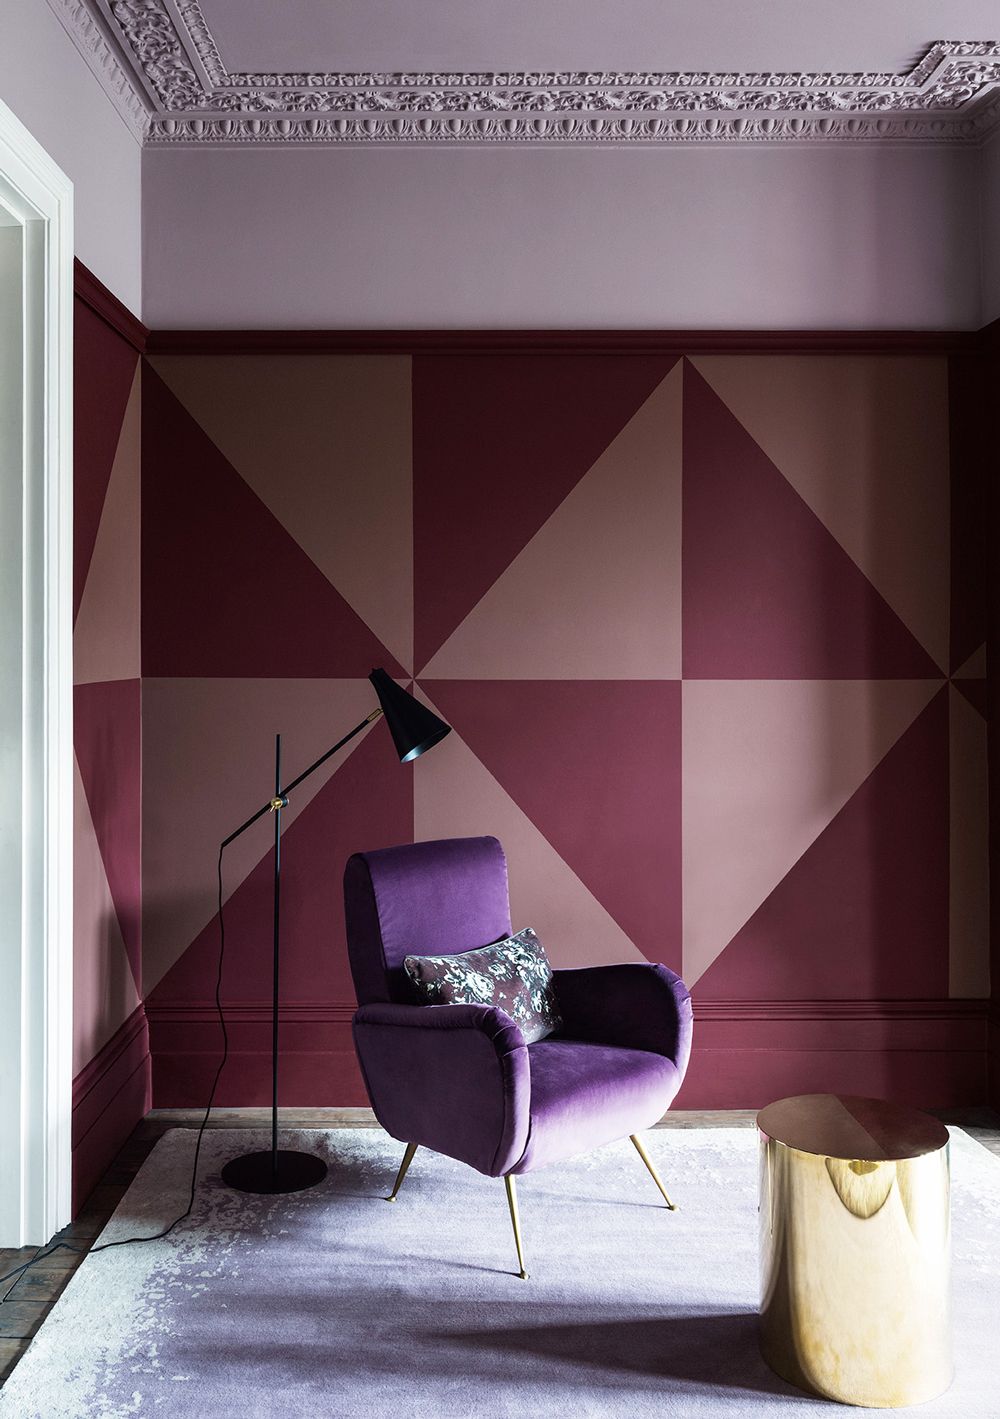 Wall Paint Design Ideas With Tape 50 Inspiring Patterns And Effects Livingetc